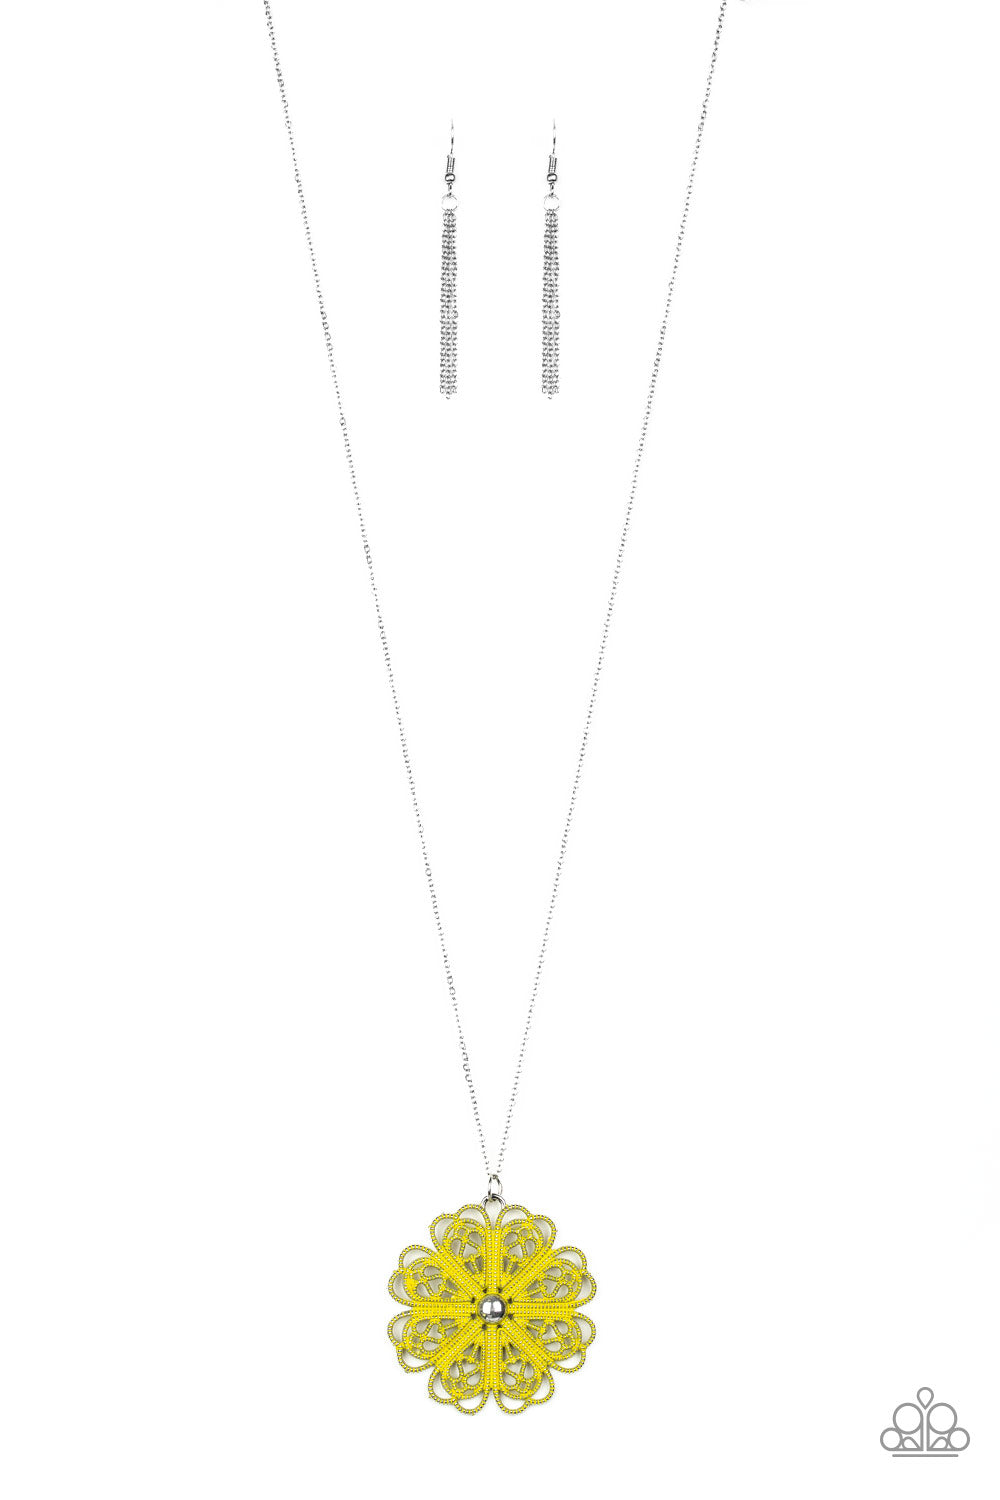 Paparazzi Accessories - Spin Your PINWHEELS - Yellow Necklace